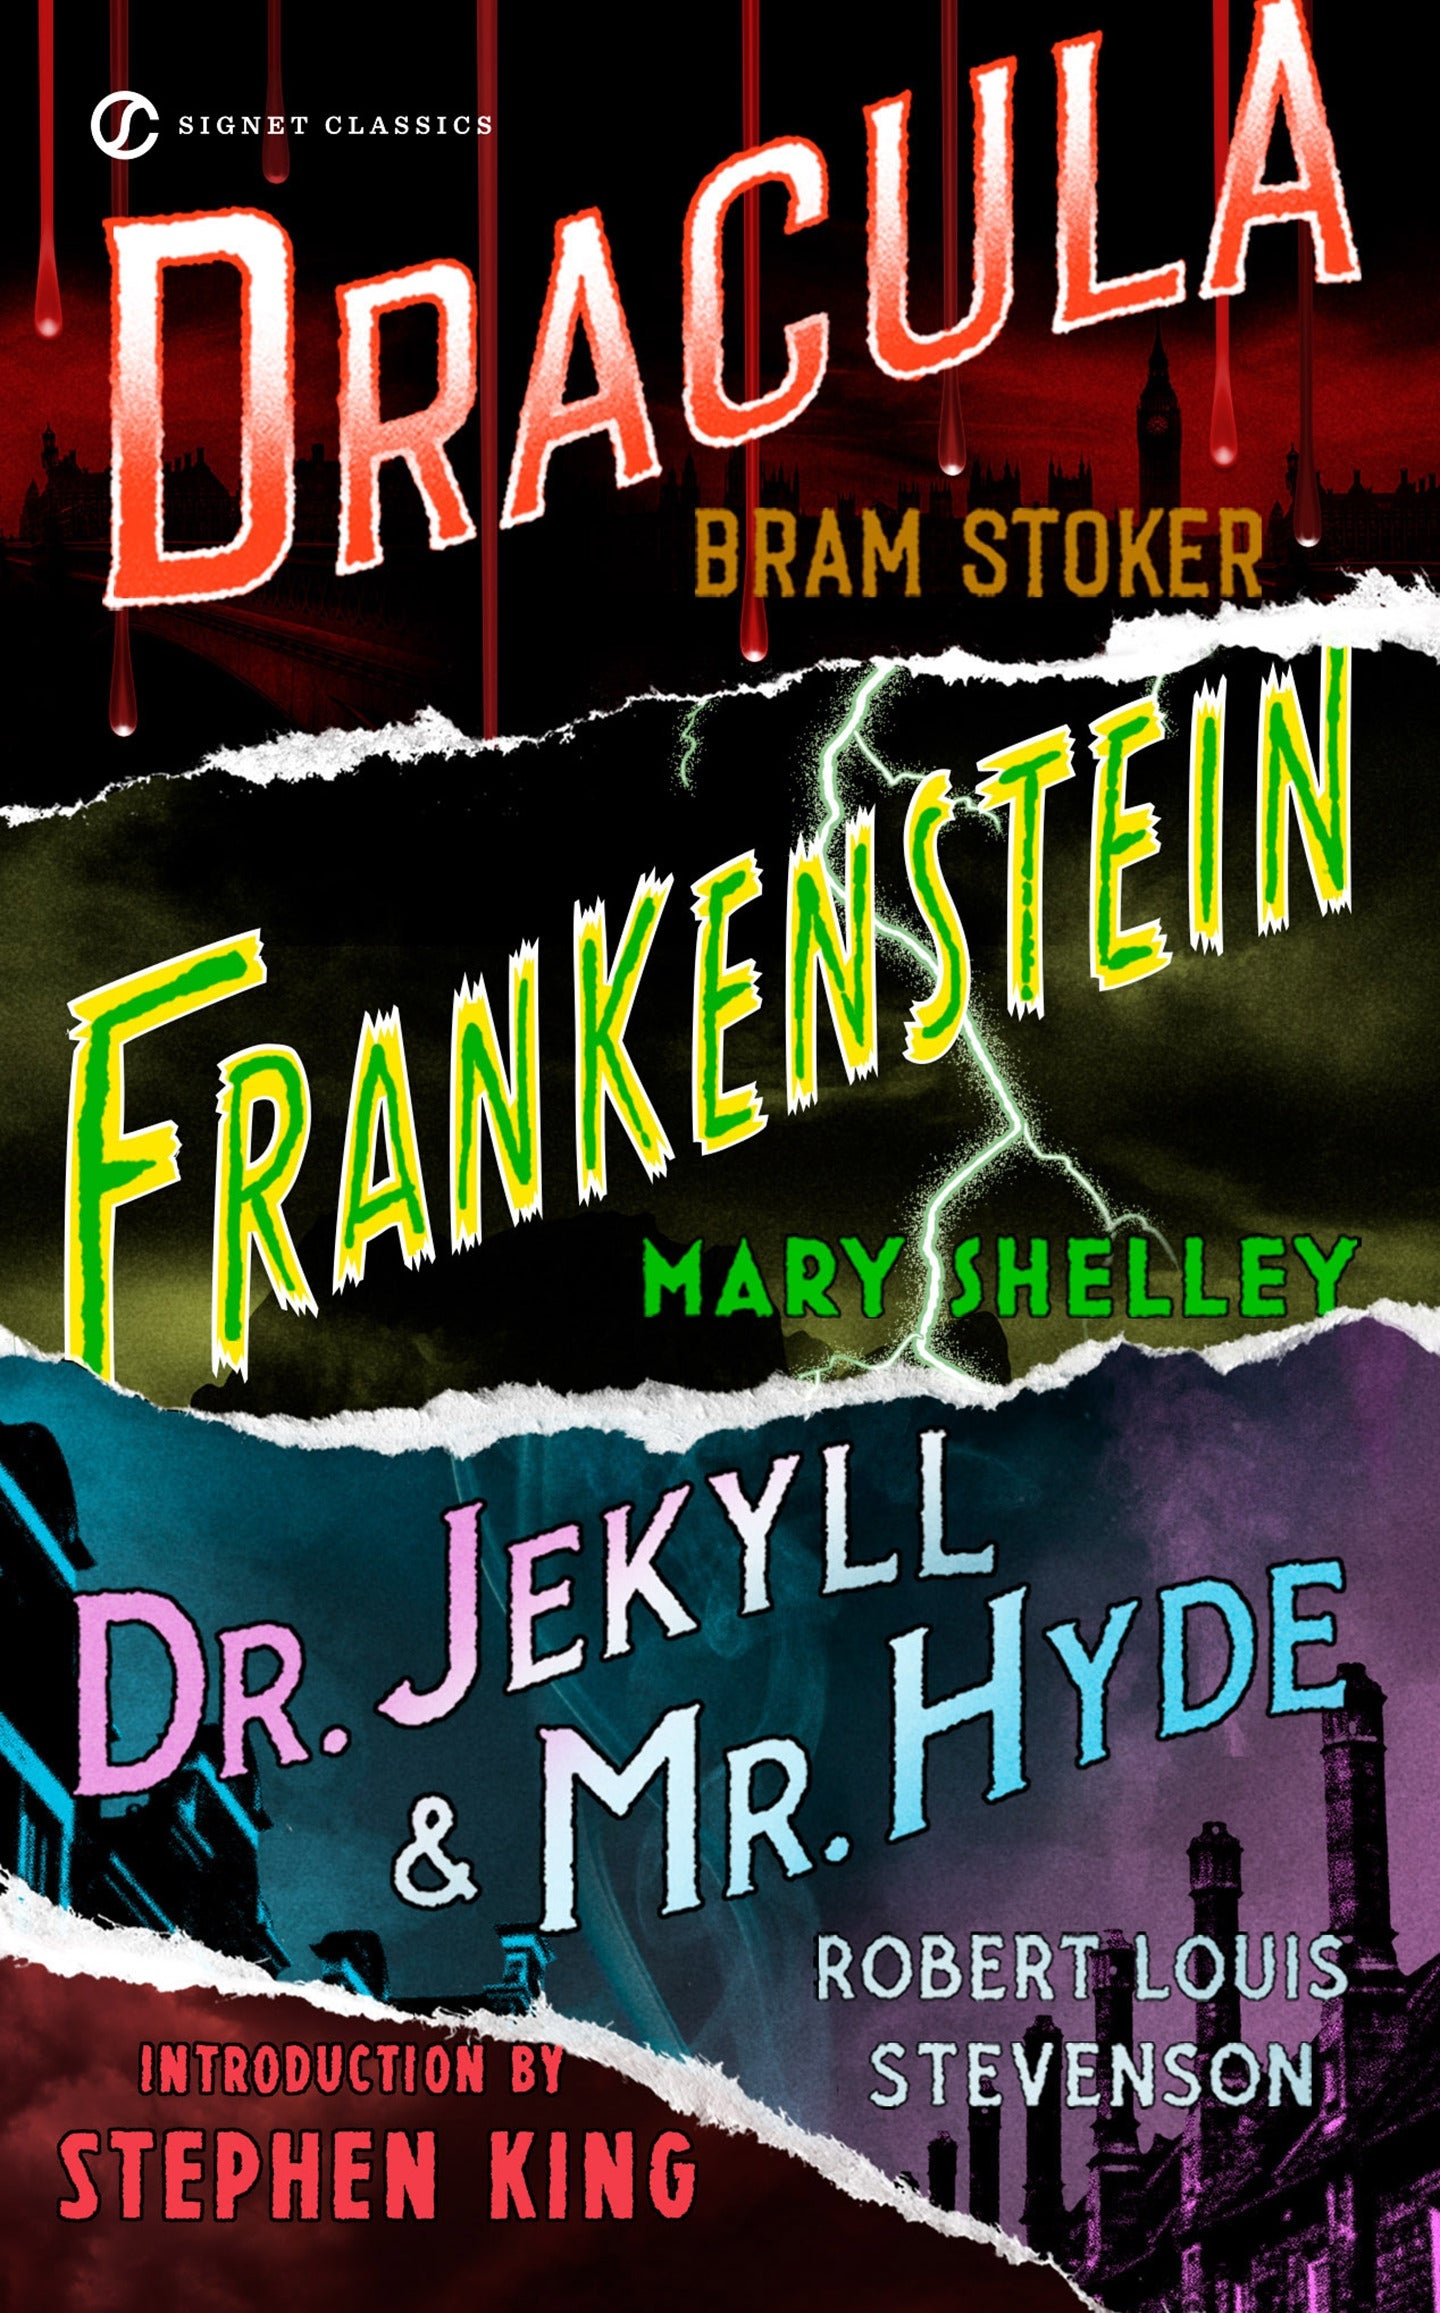 Frankenstein, Dracula, Dr. Jekyll and Mr. Hyde